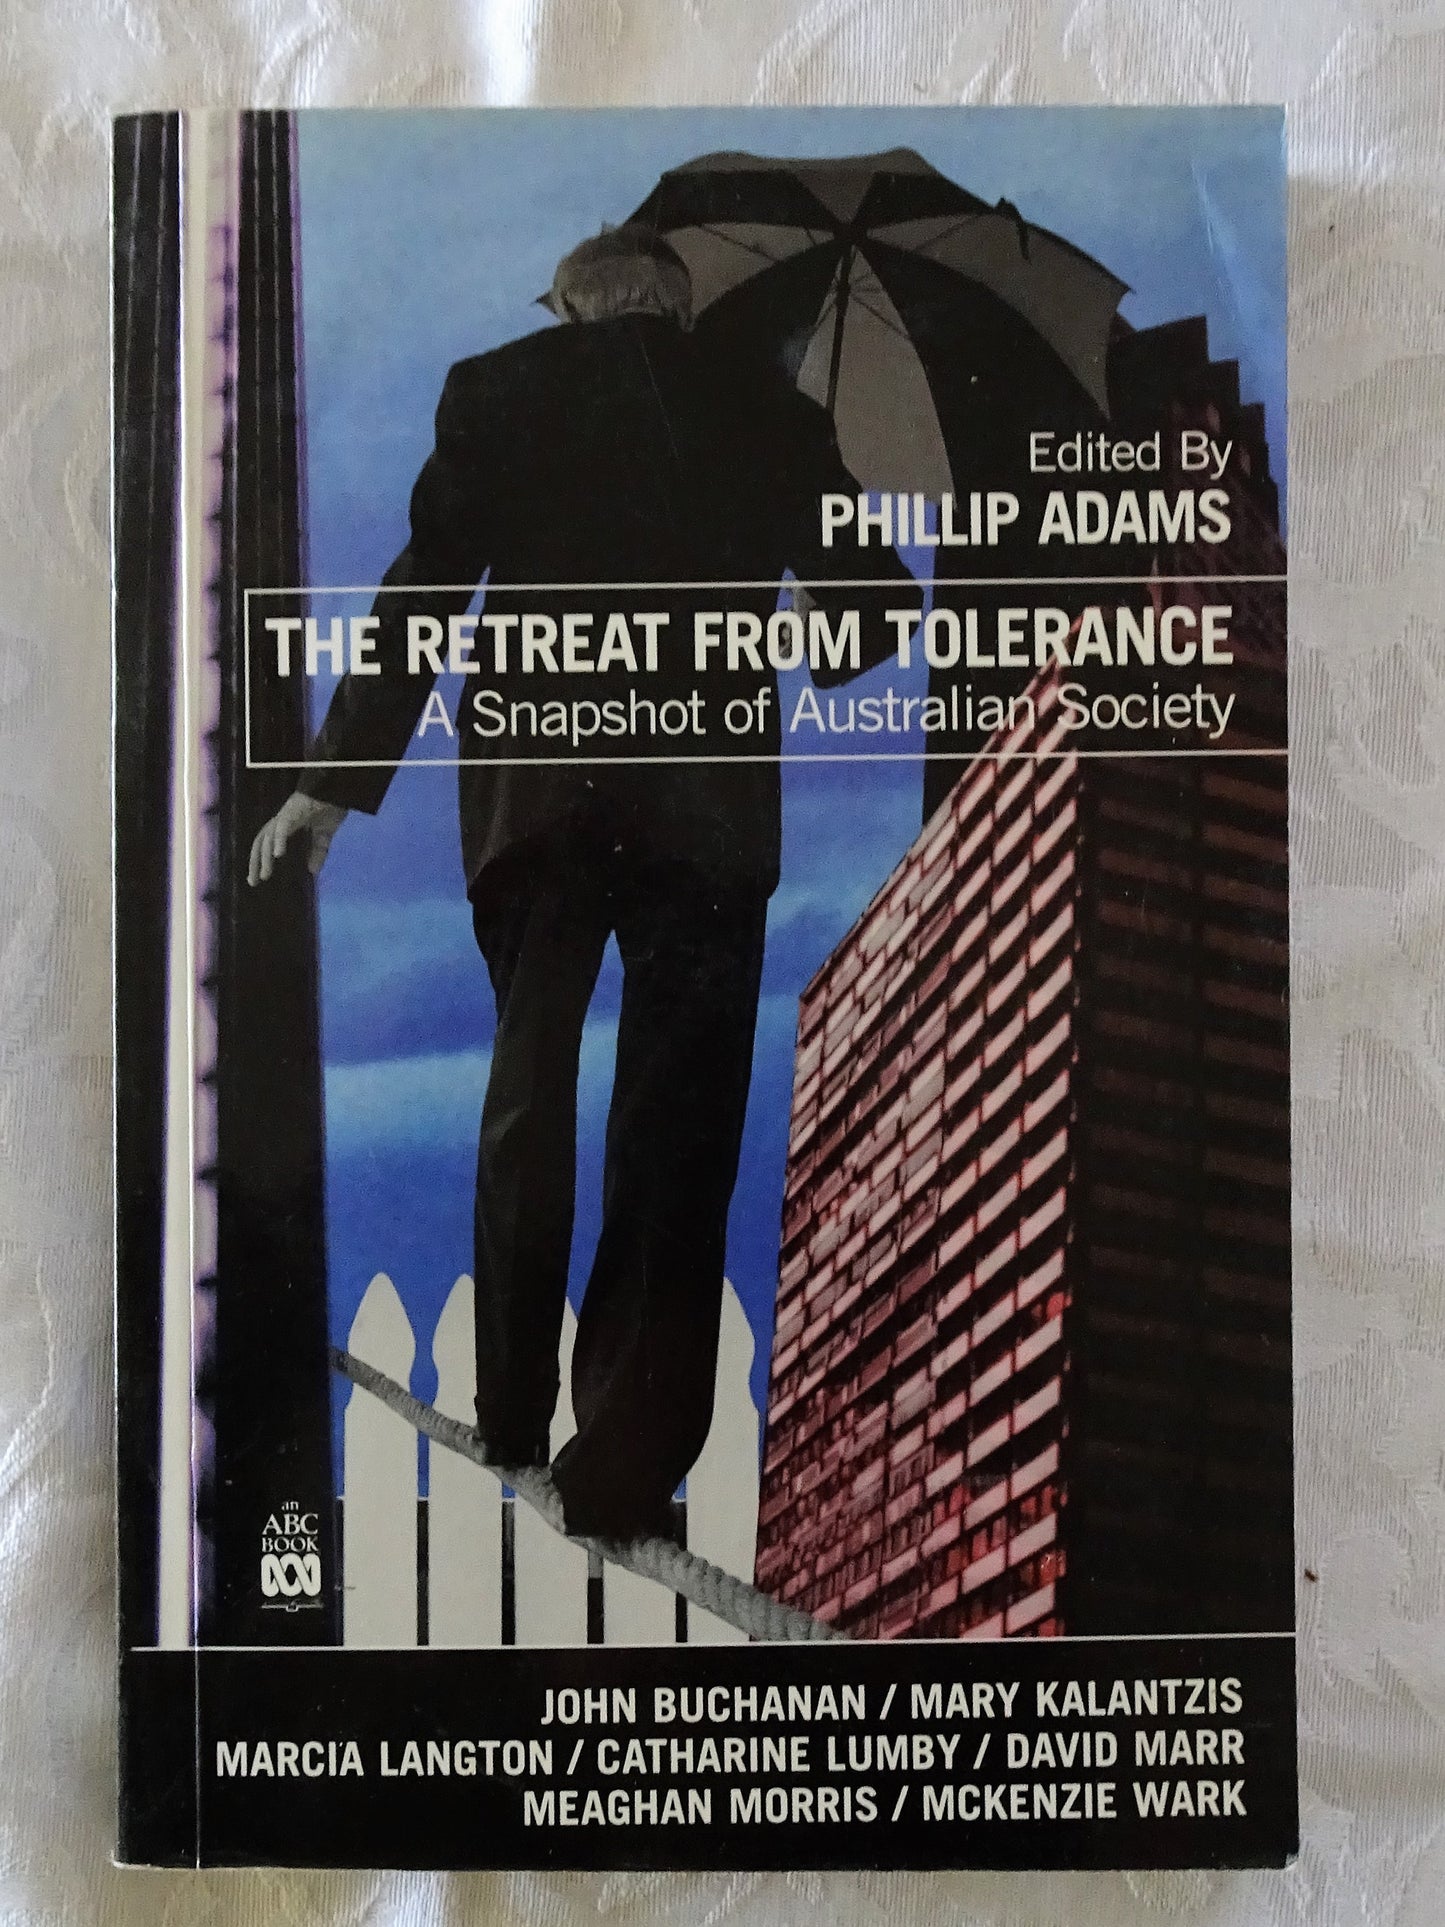 The Retreat From Tolerance by Phillip Adams